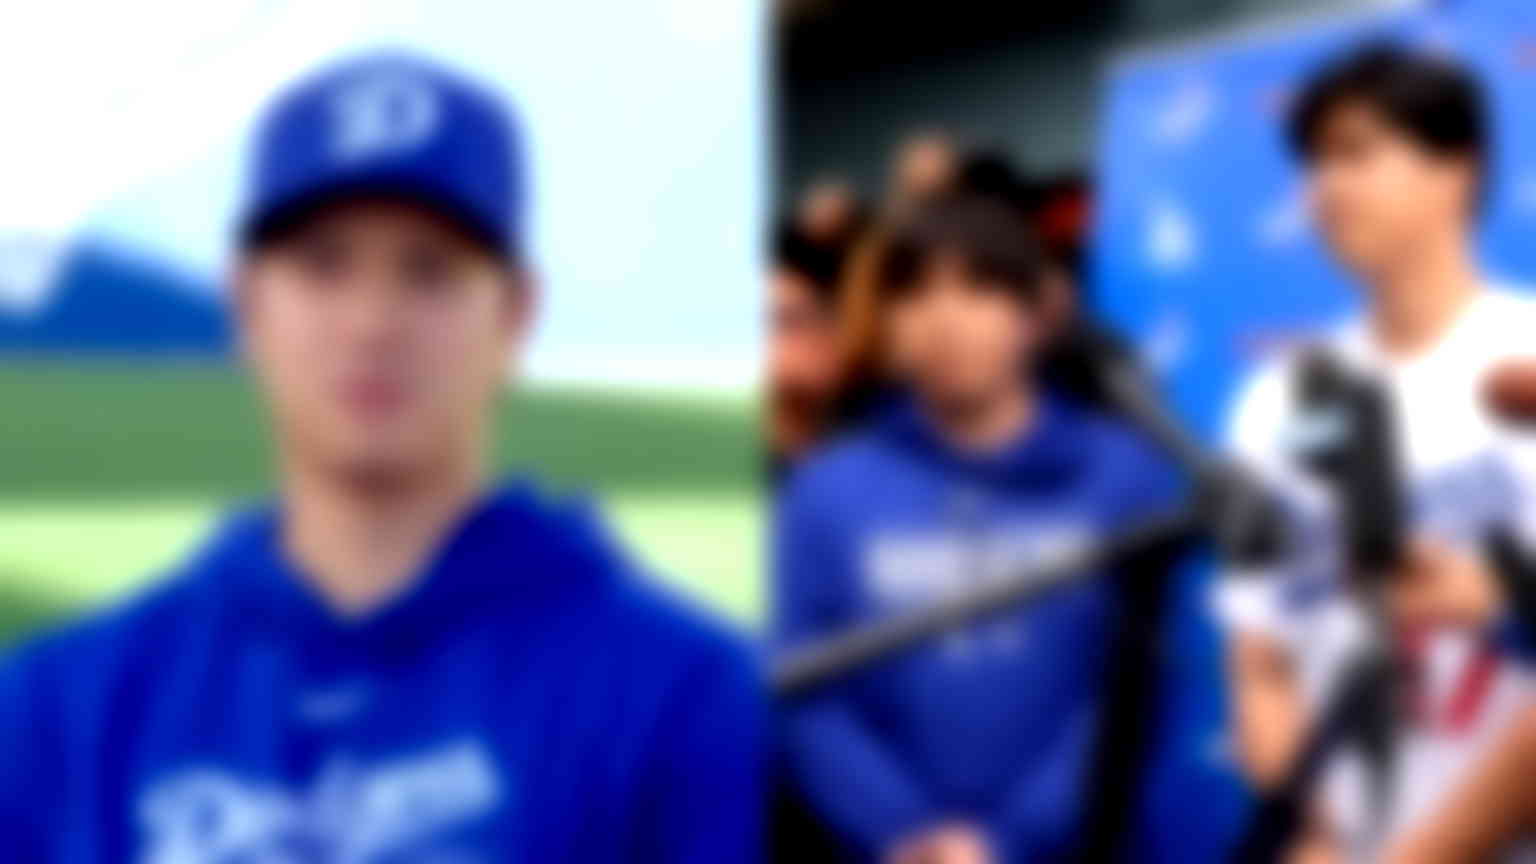 Shohei Ohtani interpreter betting scandal being turned into scripted series